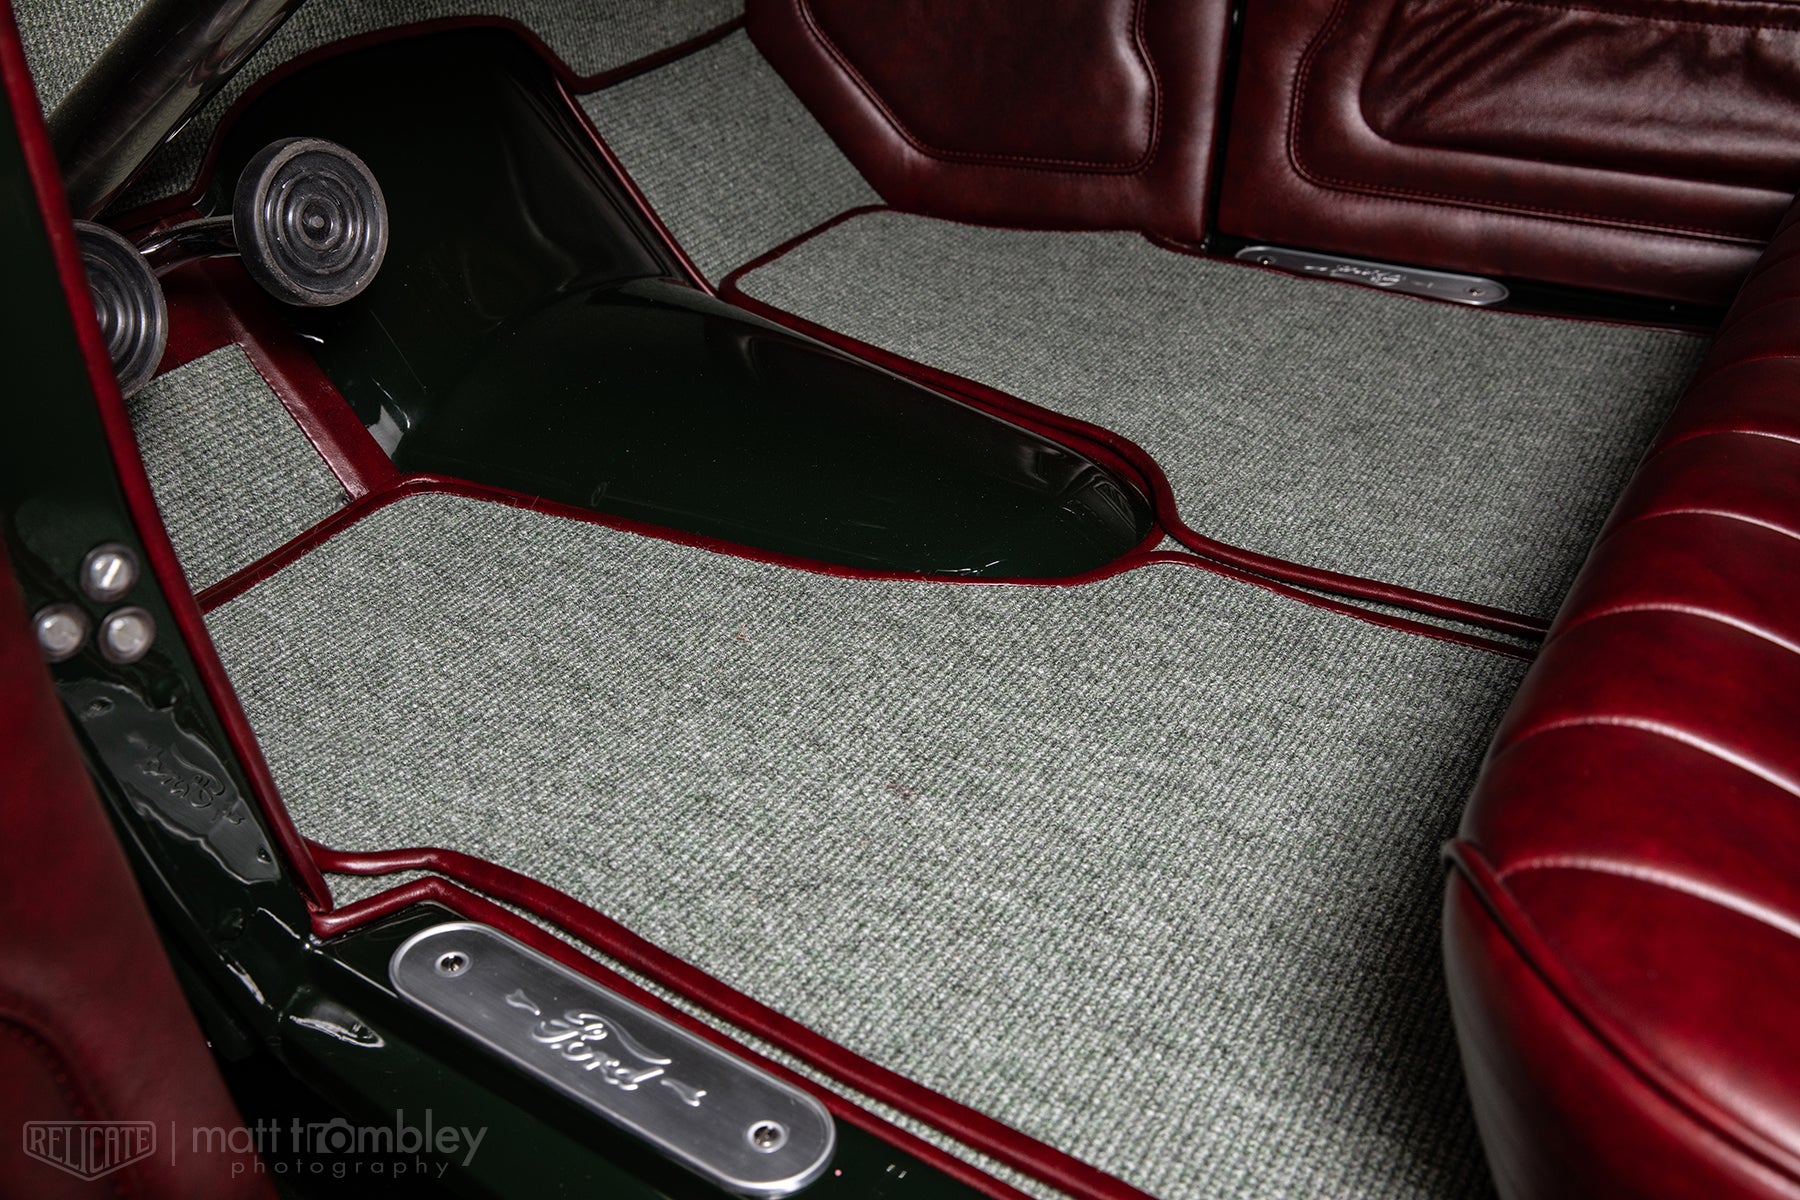 Hilton Hot Rods 1931 Ford Coupe with Relicate Leather Oxblood interior German square weave carpet